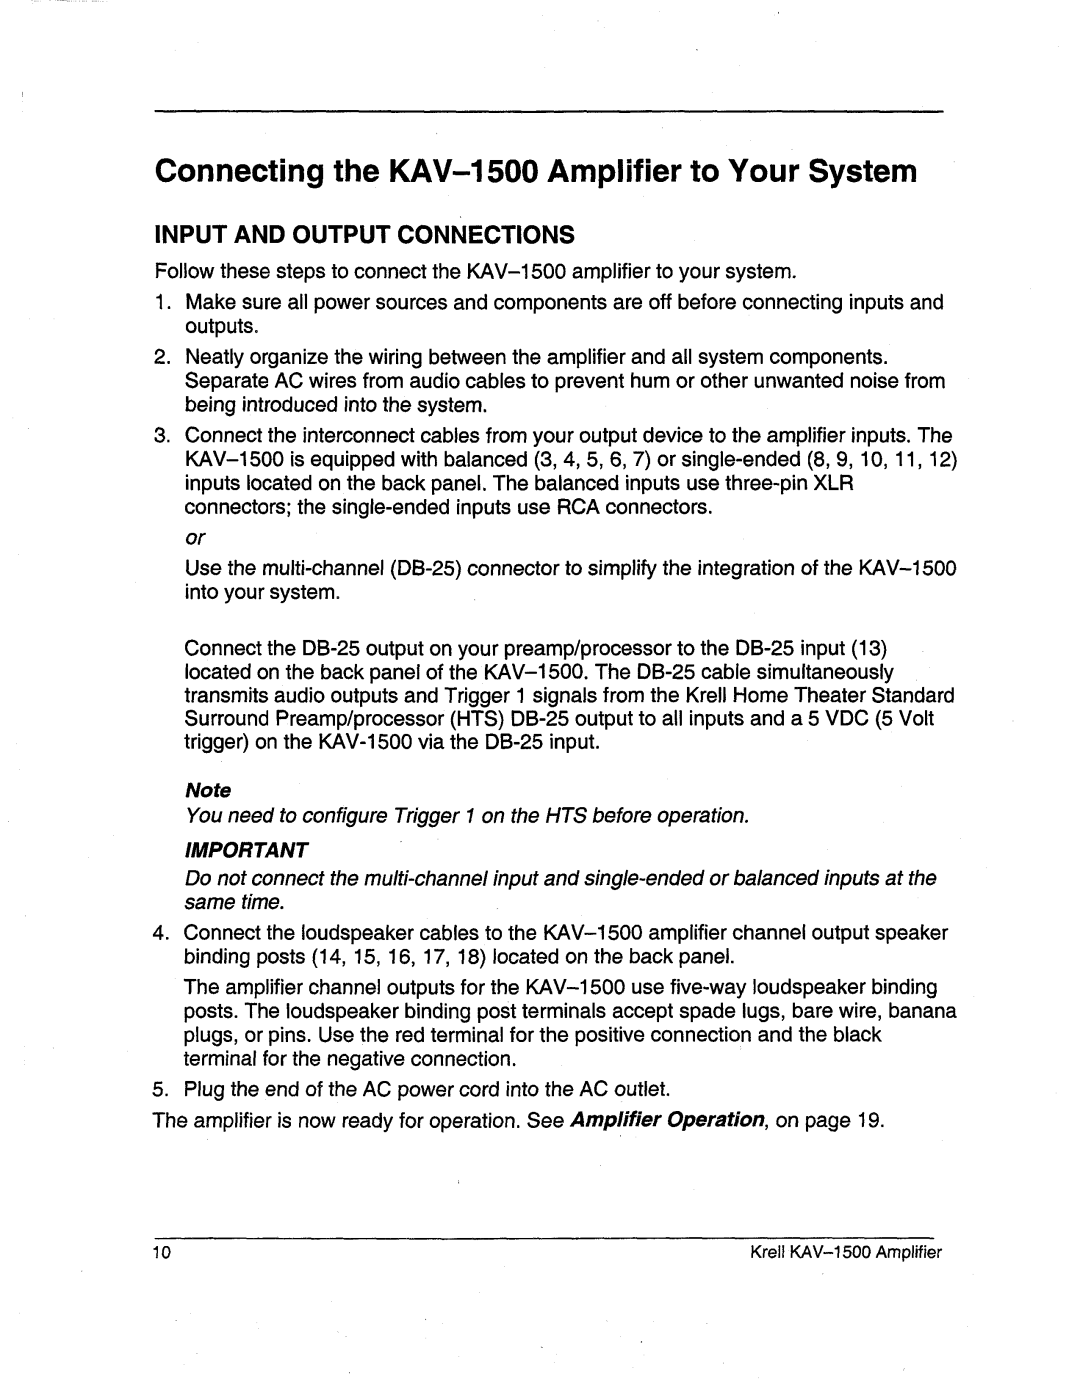 Krell Industries manual Connectingthe KAV-1500Amplifierto Your System, Input And Output Connections 